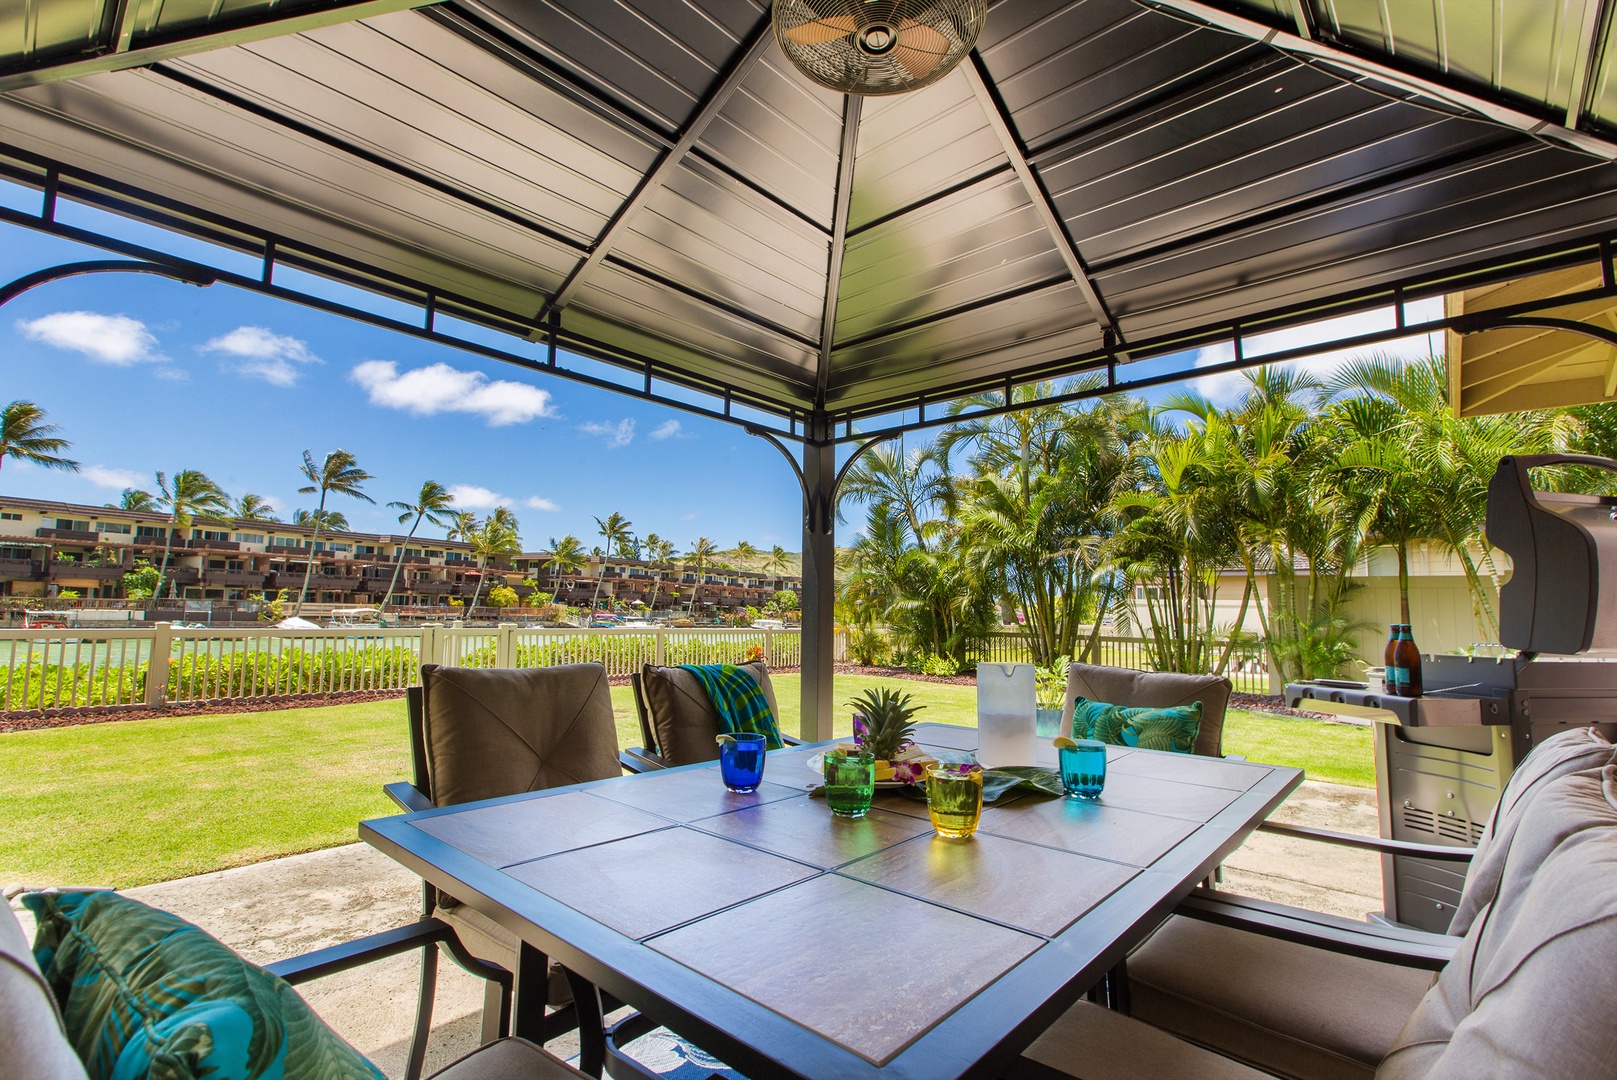 Honolulu Vacation Rentals, Ohana Kai - Barbecue while watching boaters glide by on a sunny afternoon!